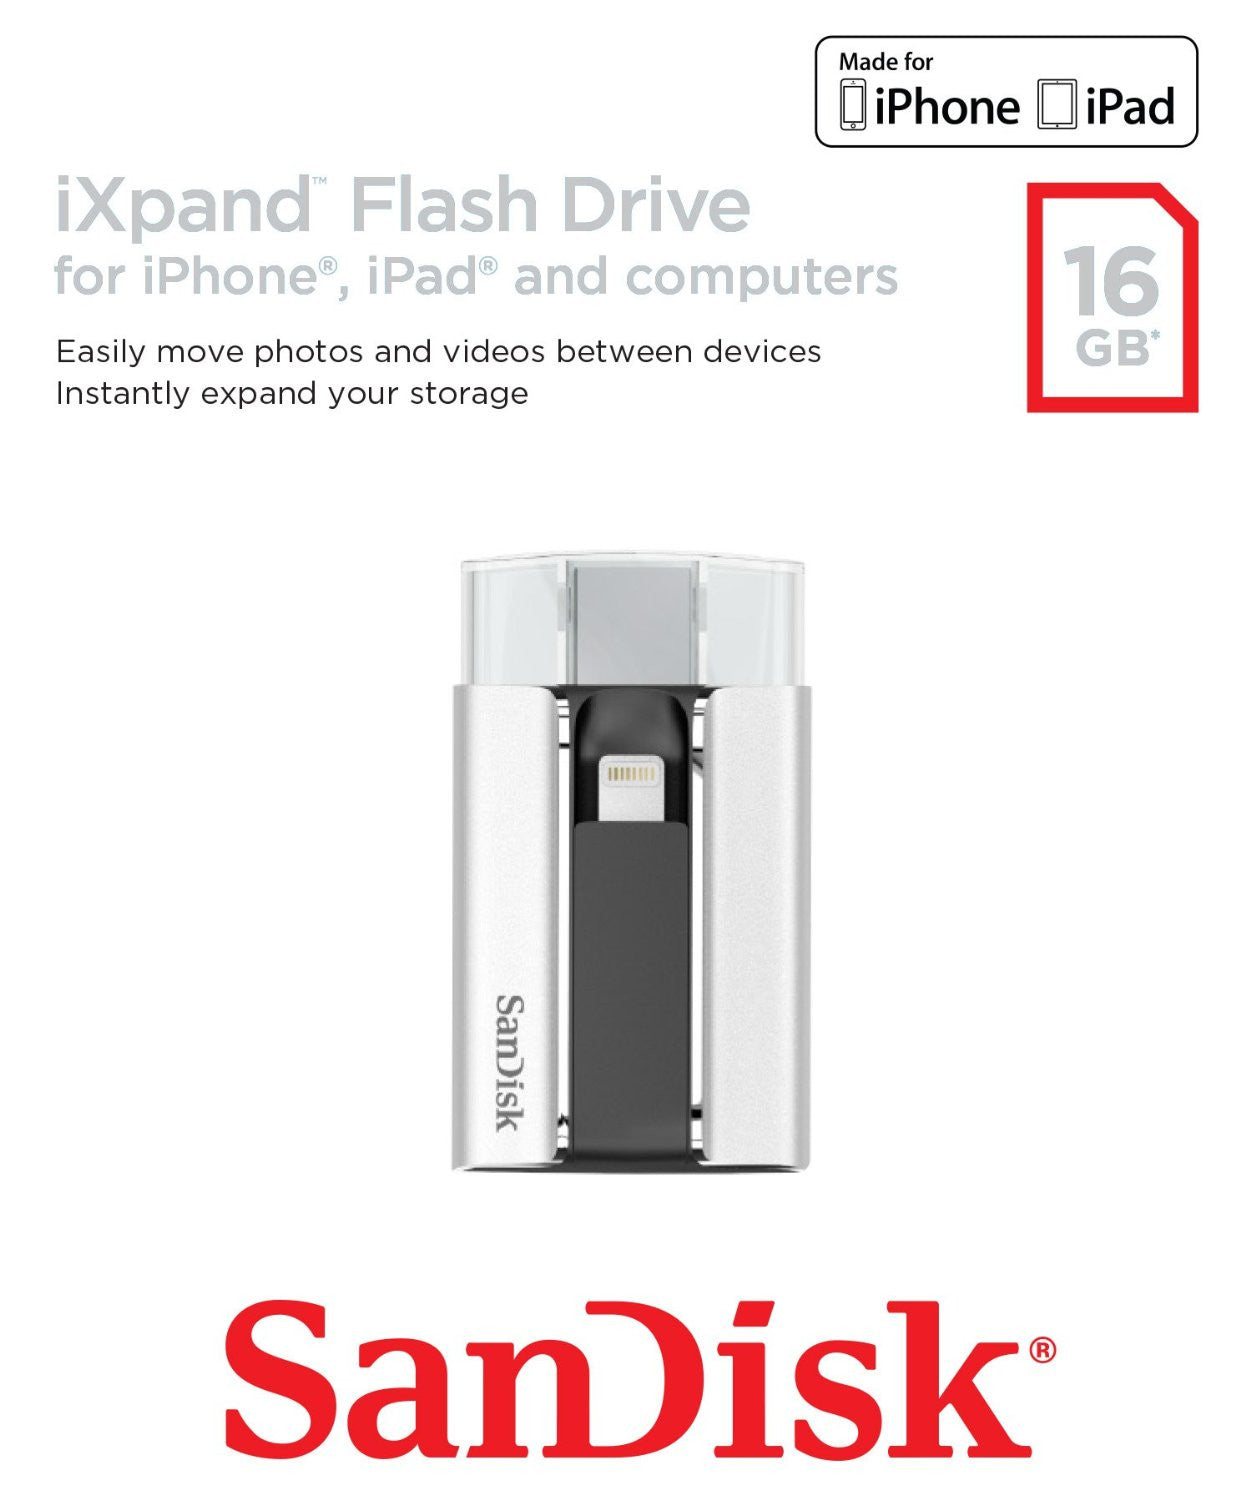 SanDisk iXpand 16GB USB 2.0 Mobile Flash Drive with Lightning connector For iPhones, iPads & Computers